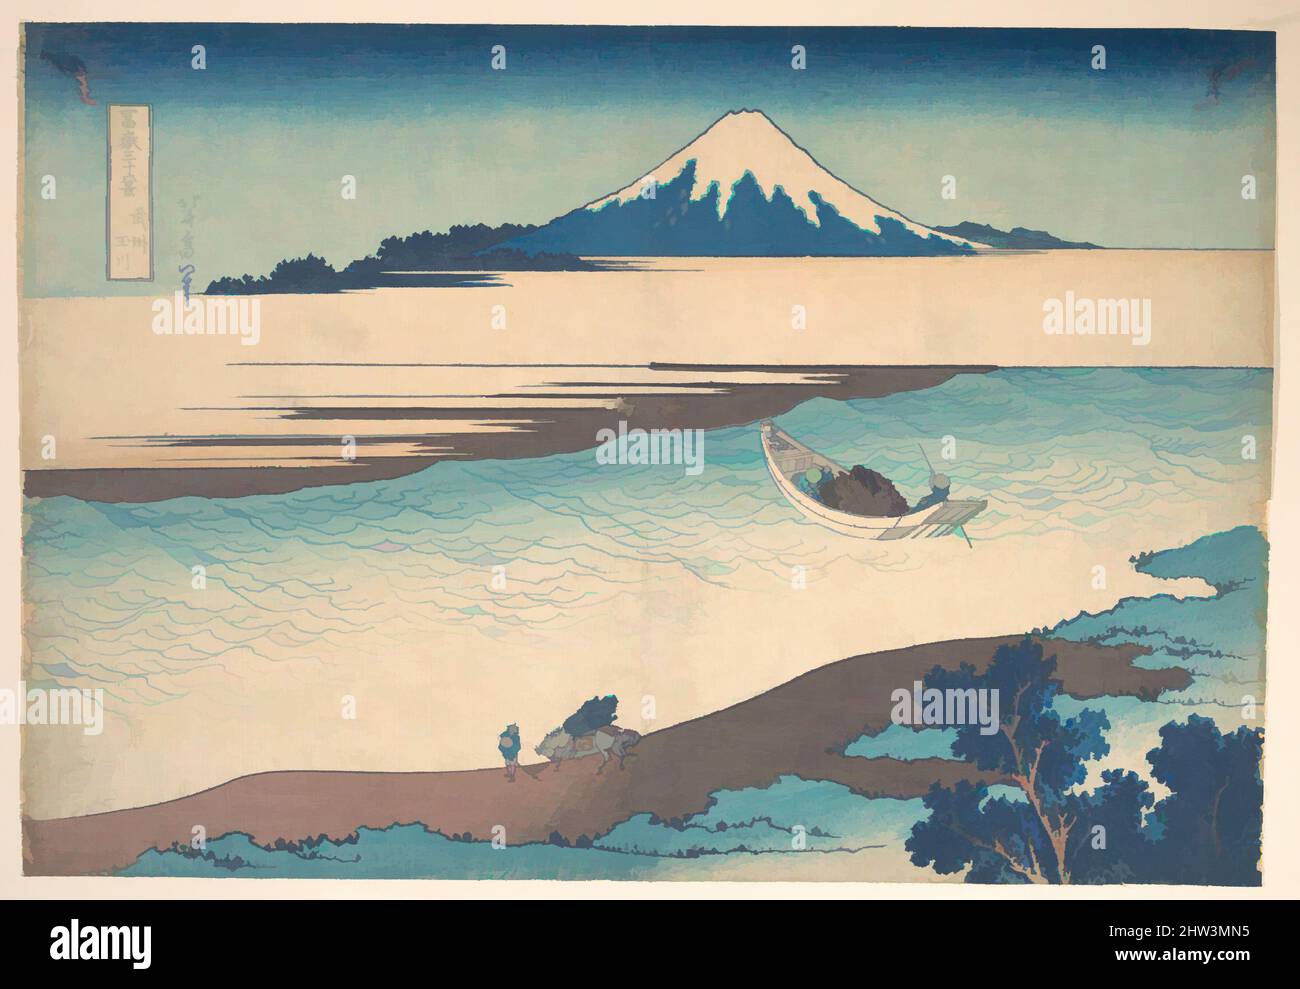 Art inspired by 冨嶽三十六景　武州玉川, Fuji—The Tama River, Musashi Province, from the series Thirty-six Views of Mount Fuji (Fugaku sanjūrokkei), Edo period (1615–1868), ca. 1830–32, Japan, Polychrome woodblock print; ink and color on paper, 10 1/8 x 14 3/4 in. (25.7 x 37.5 cm), Prints, Classic works modernized by Artotop with a splash of modernity. Shapes, color and value, eye-catching visual impact on art. Emotions through freedom of artworks in a contemporary way. A timeless message pursuing a wildly creative new direction. Artists turning to the digital medium and creating the Artotop NFT Stock Photo